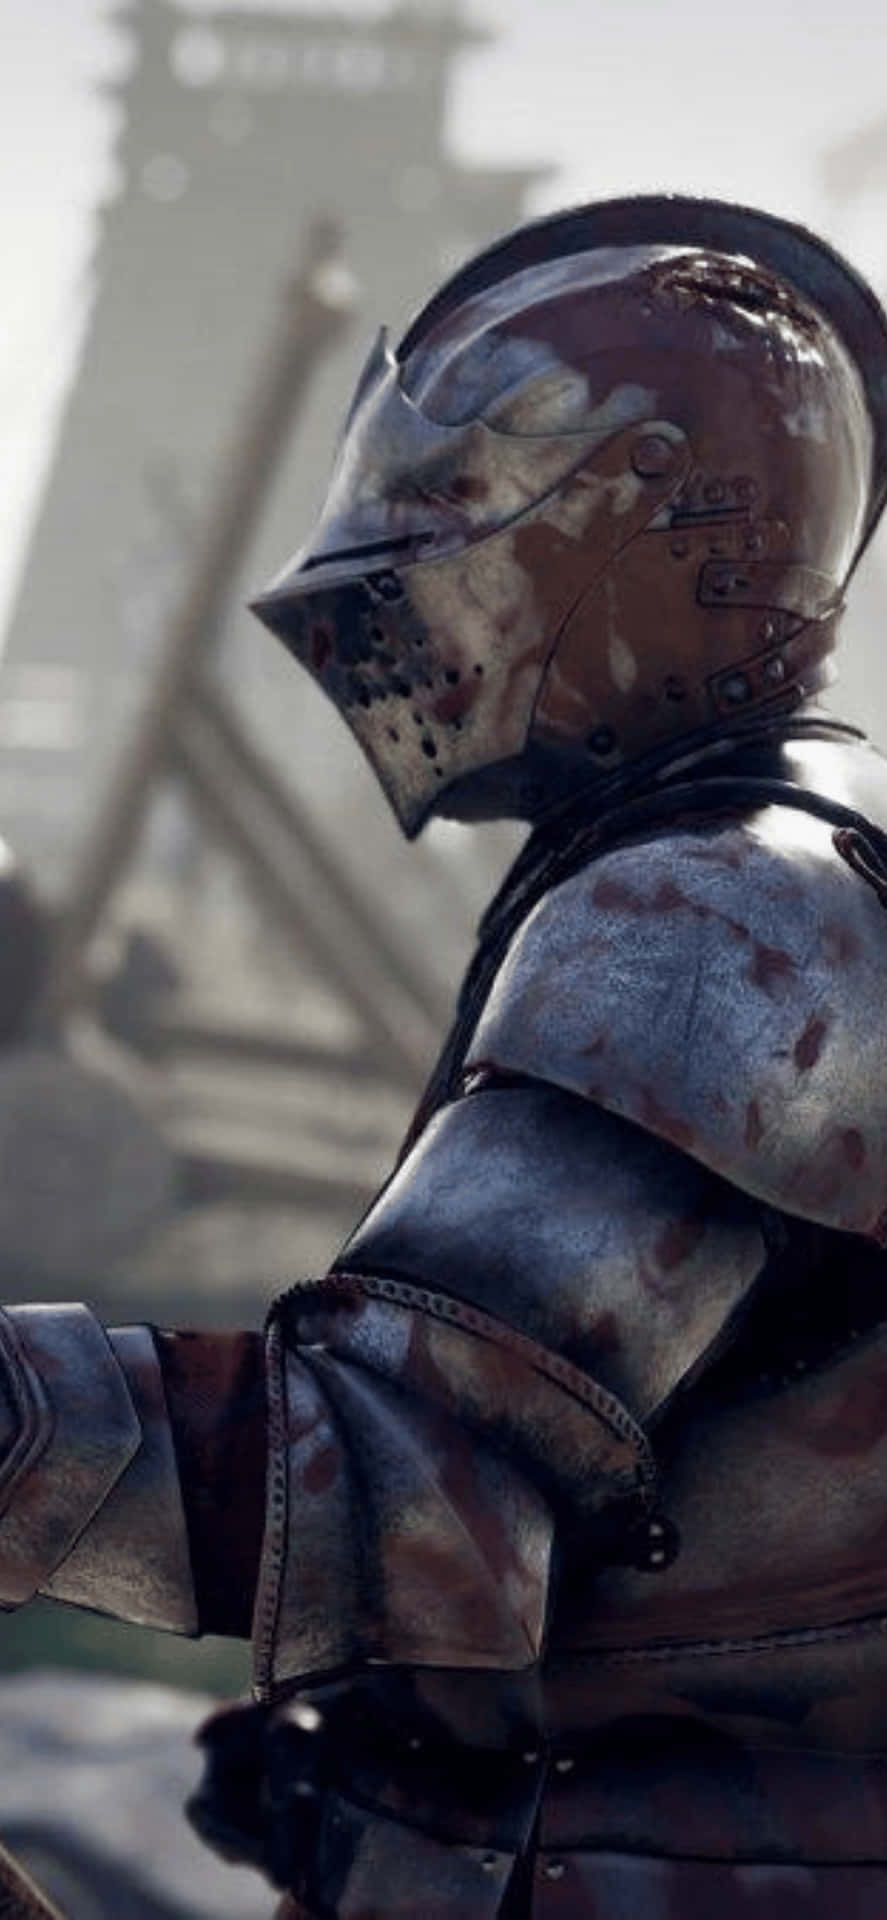 Medieval combat has been taken to the next level with Mordhau.